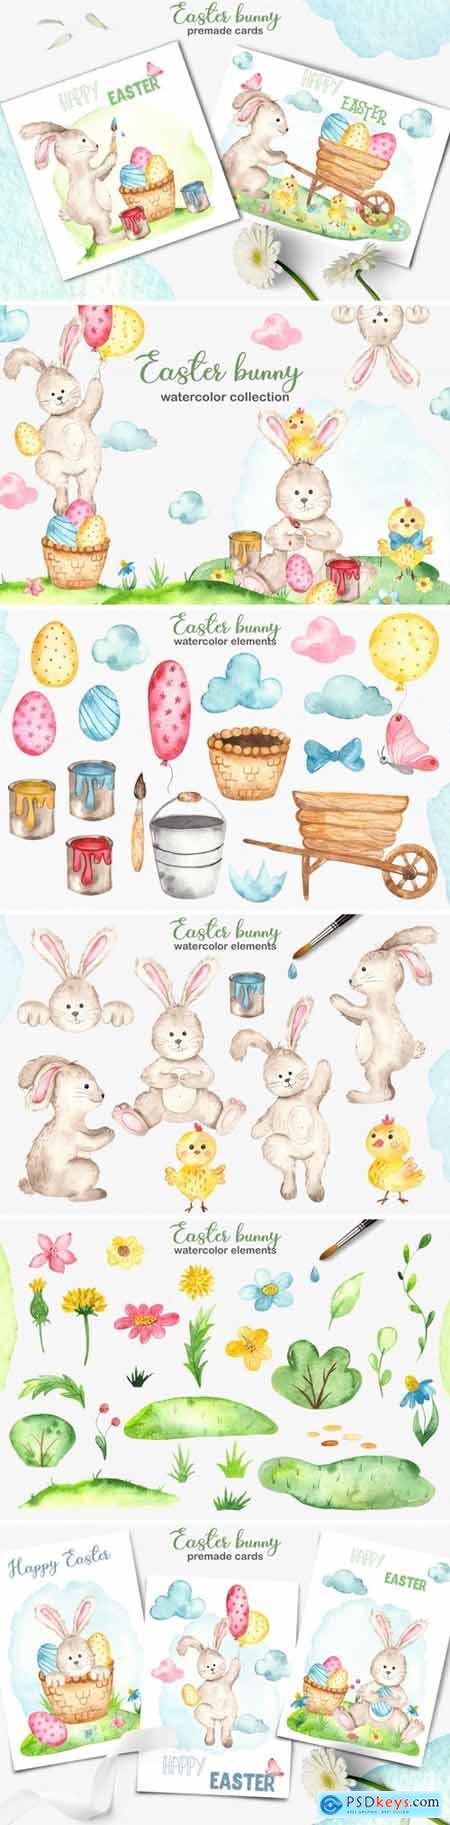 Watercolor Easter Bunny collection